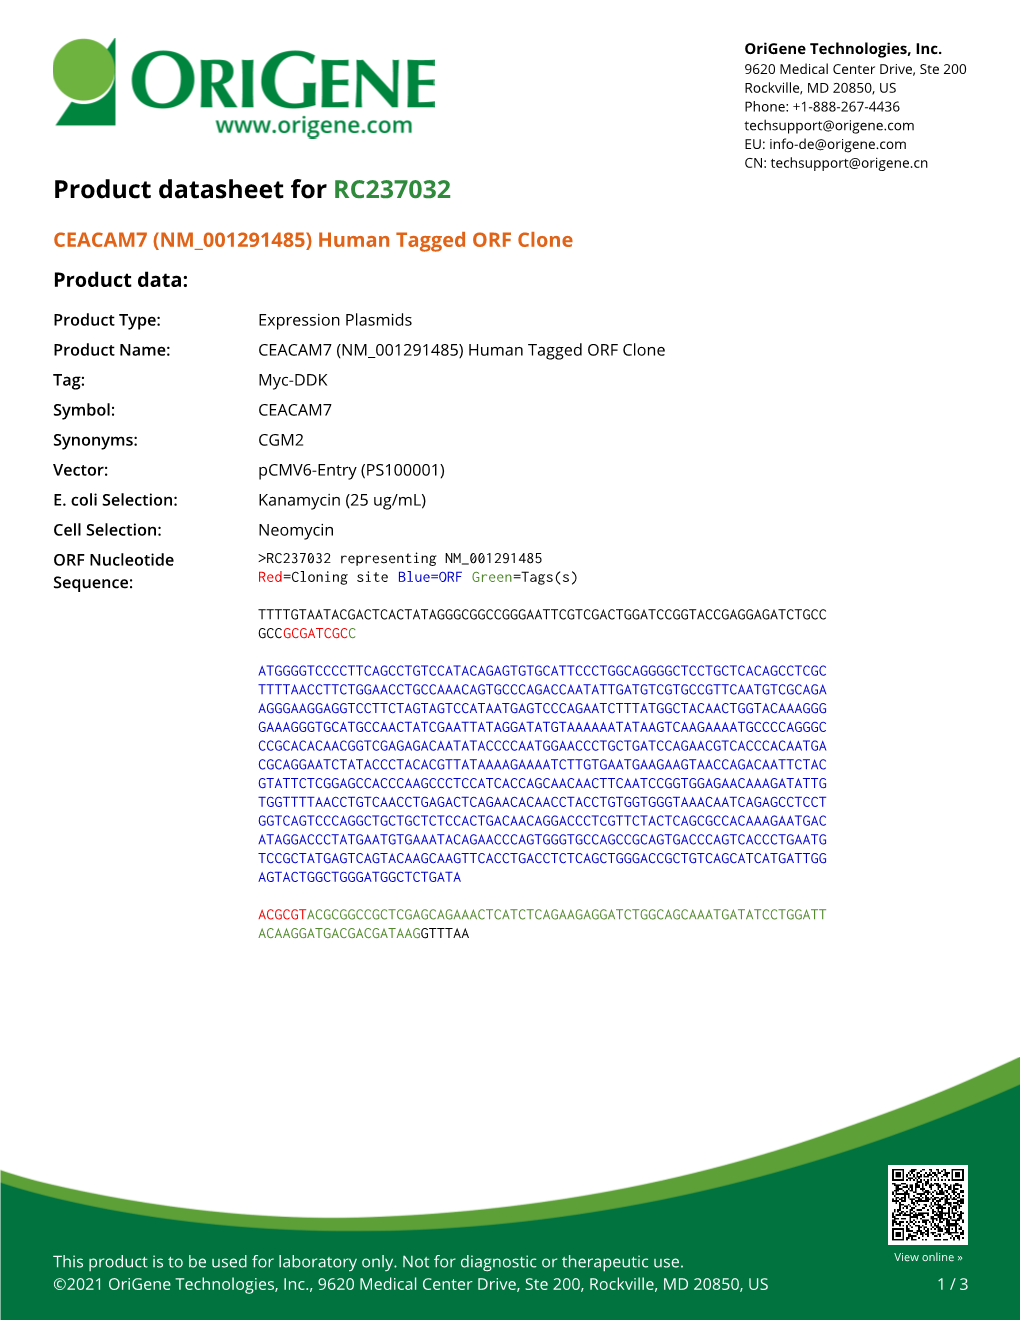 CEACAM7 (NM 001291485) Human Tagged ORF Clone Product Data